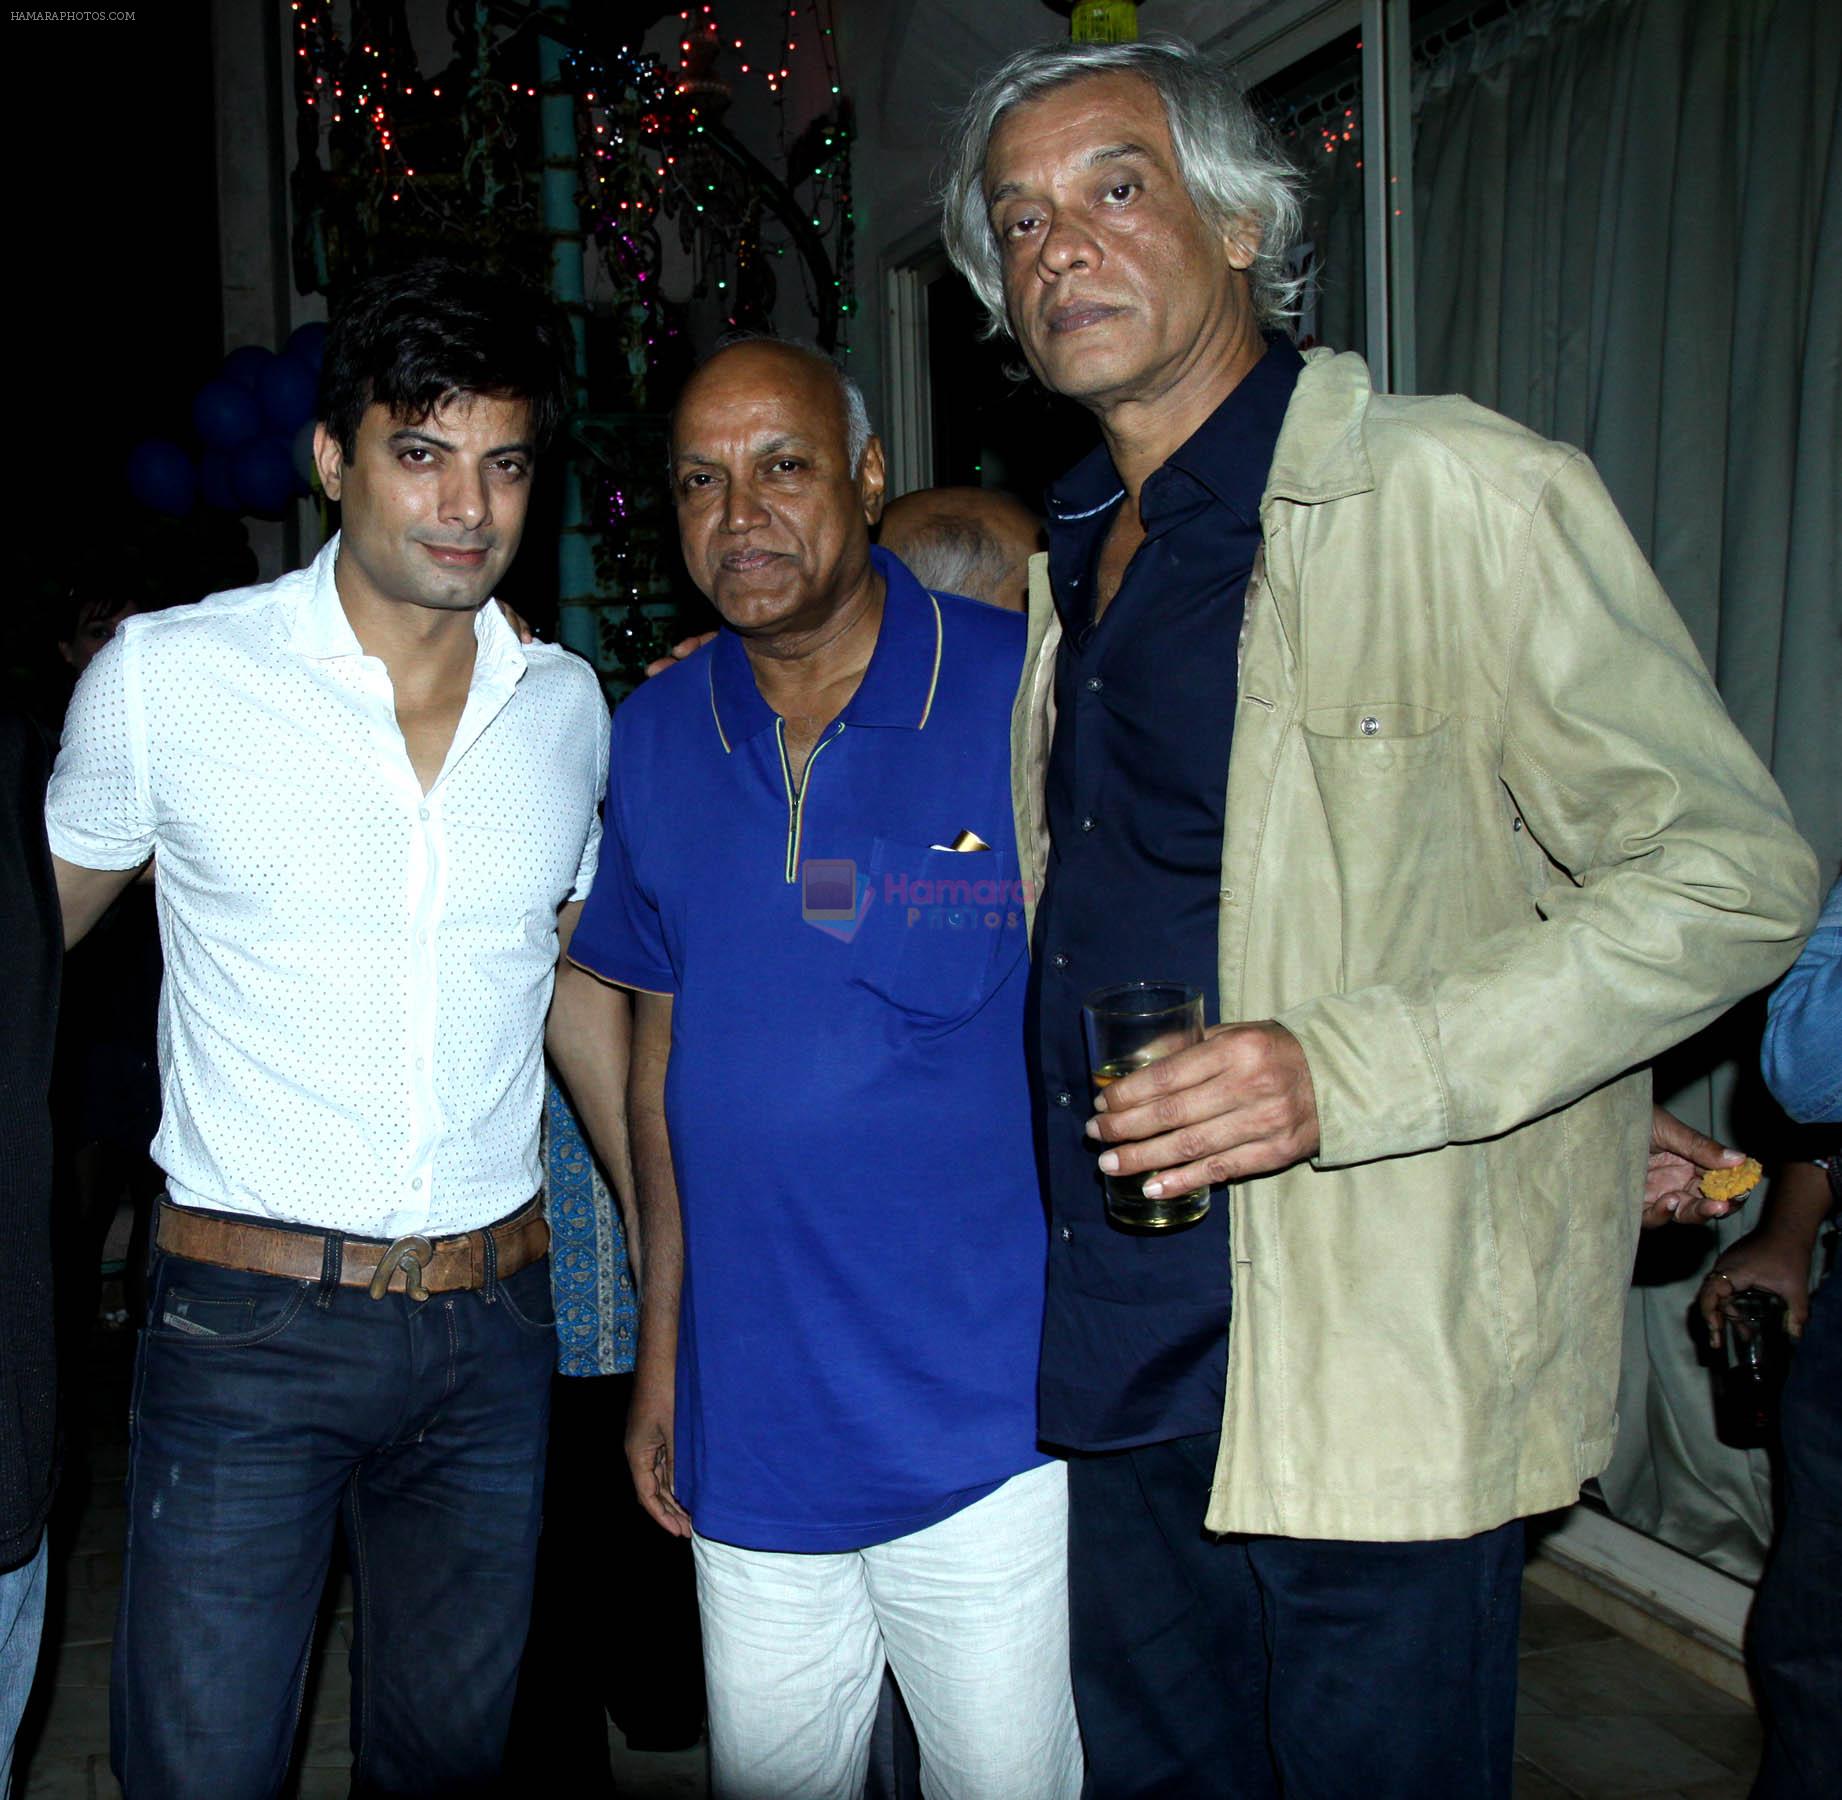 rahul bhat,manmohan singh & sudhir mishra at a surprise birthday party for Sudhir Mishra by Rahul Bhat in Mumbai on 22nd Jan 2014